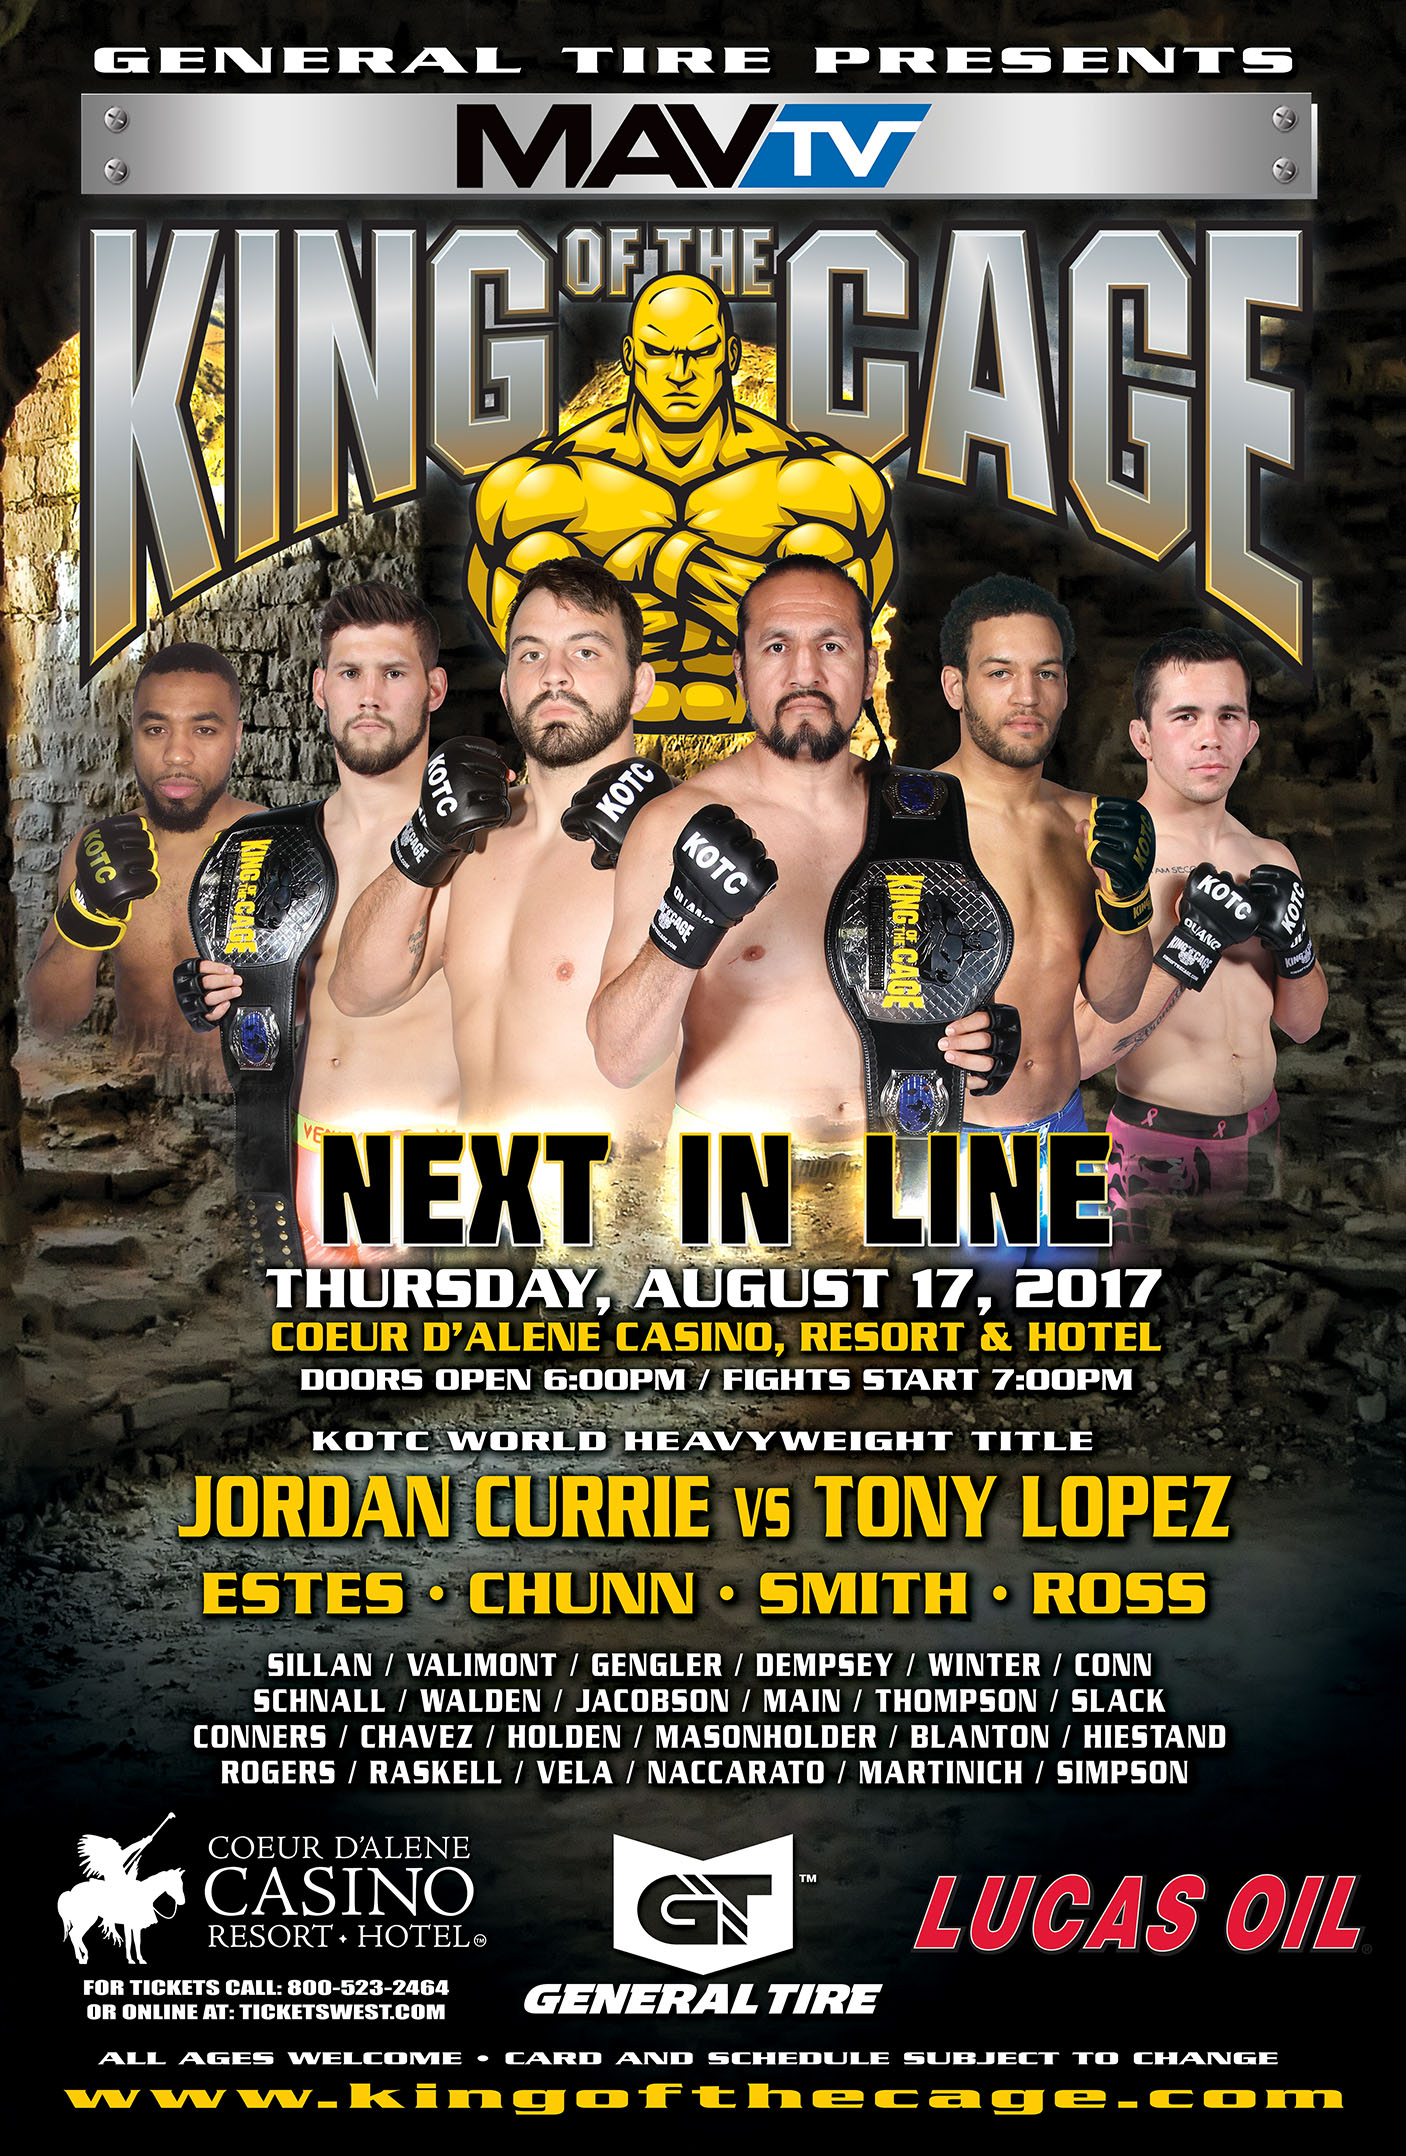 King of the Cage Returns to Coeur D’Alene Casino Resort on August 17 for “NEXT IN LINE”